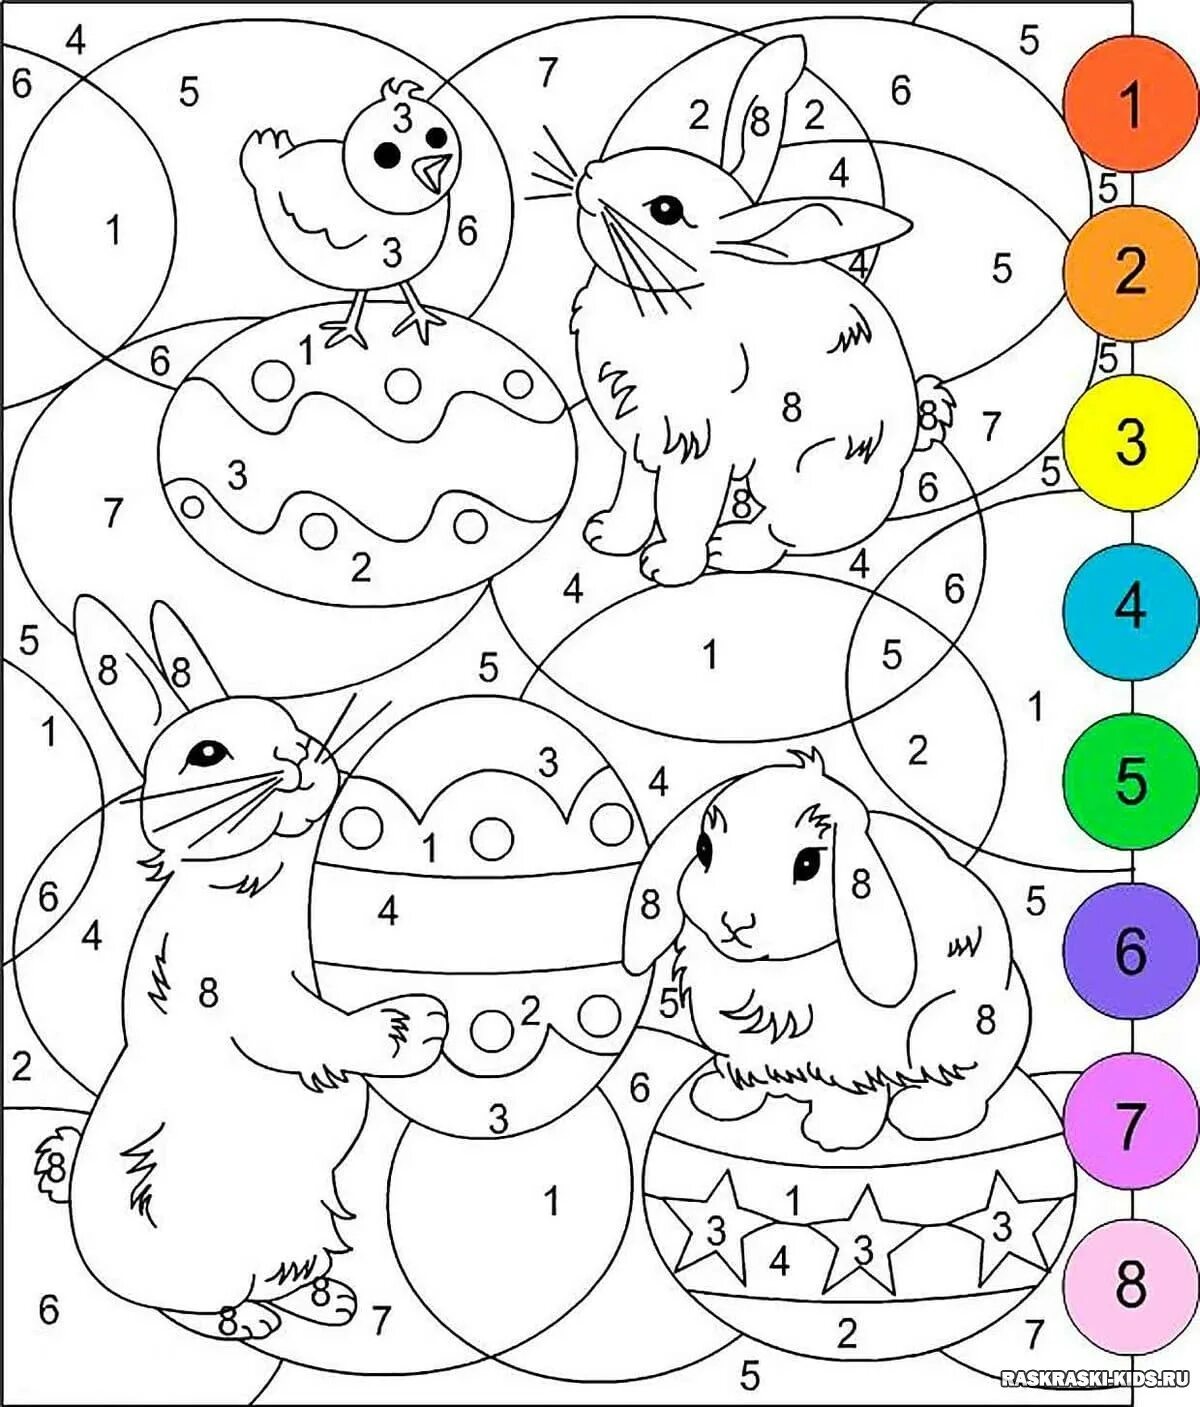 Glorious 6 years in numbers coloring book